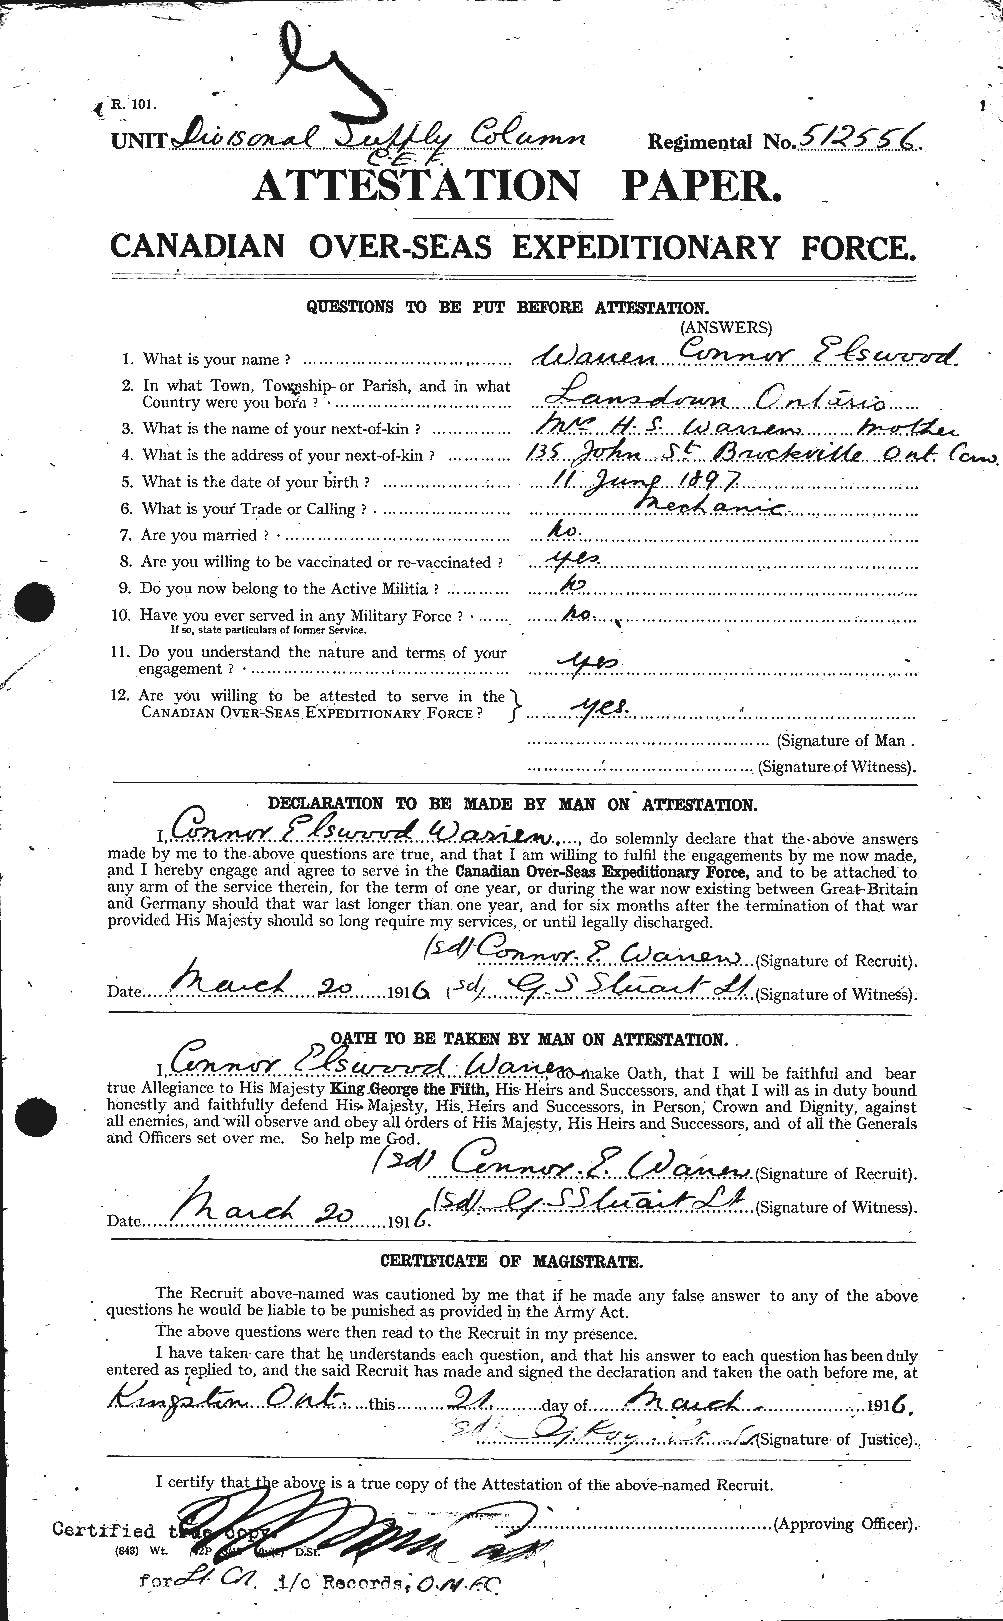 Personnel Records of the First World War - CEF 658399a